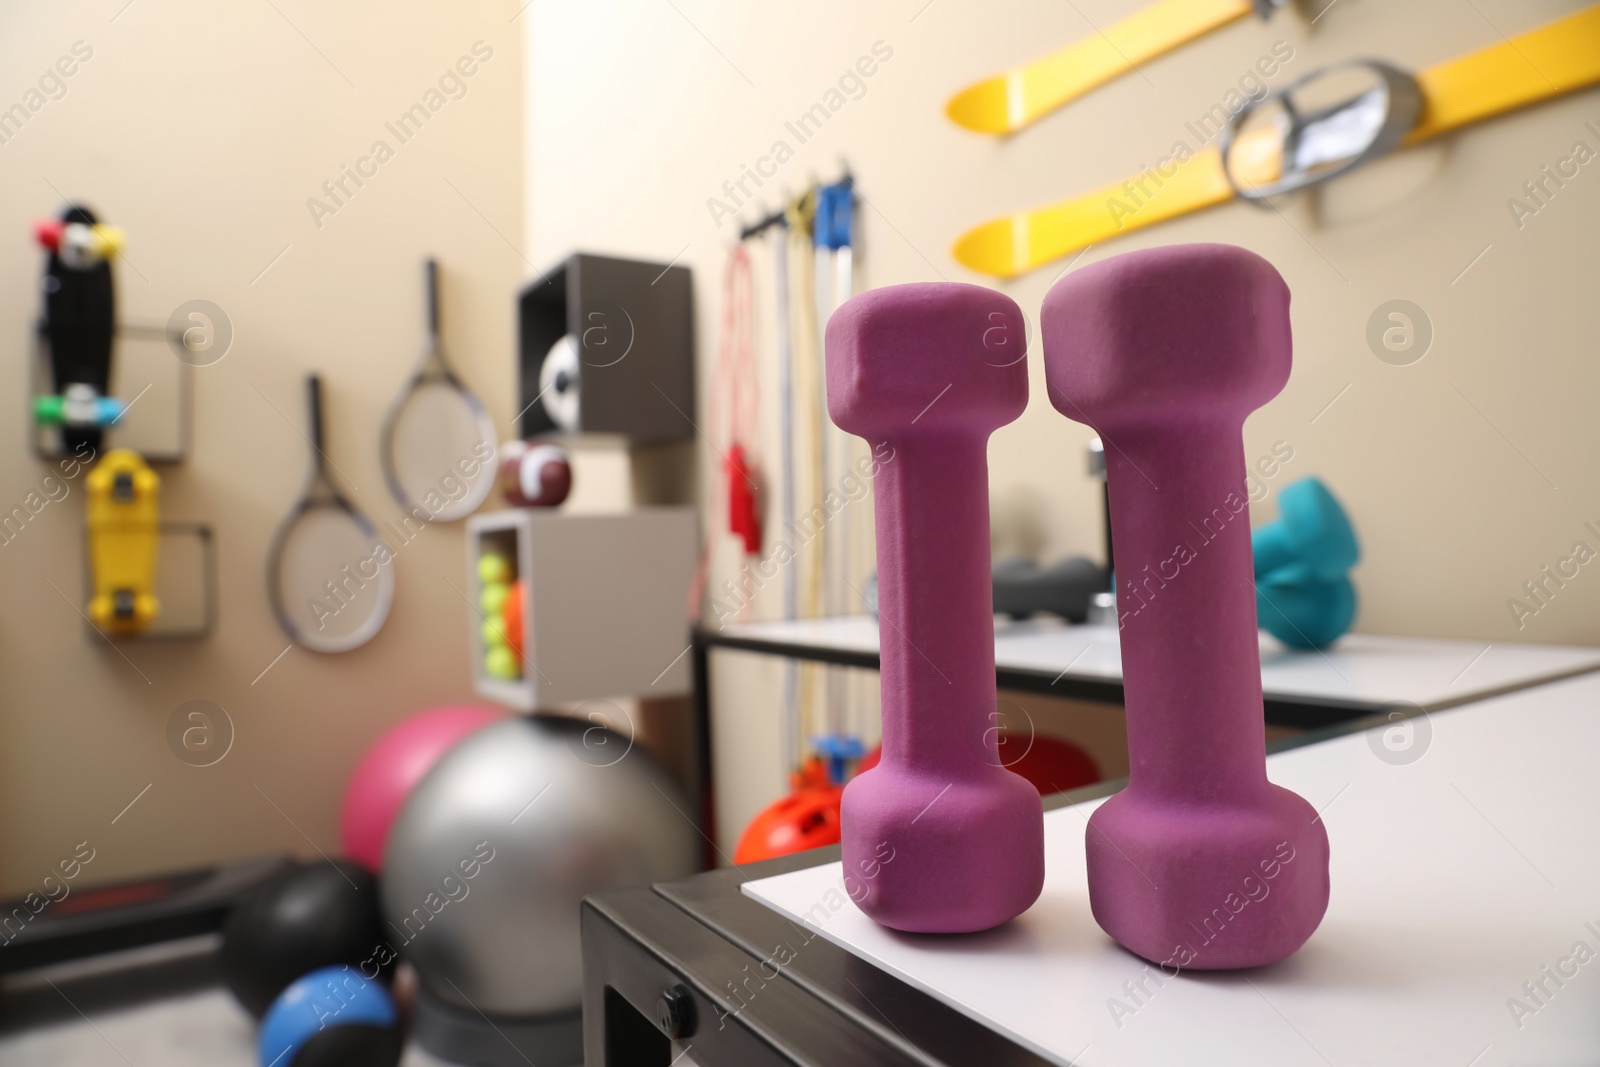 Photo of Pink dumbbells on white table in room with other sports equipment